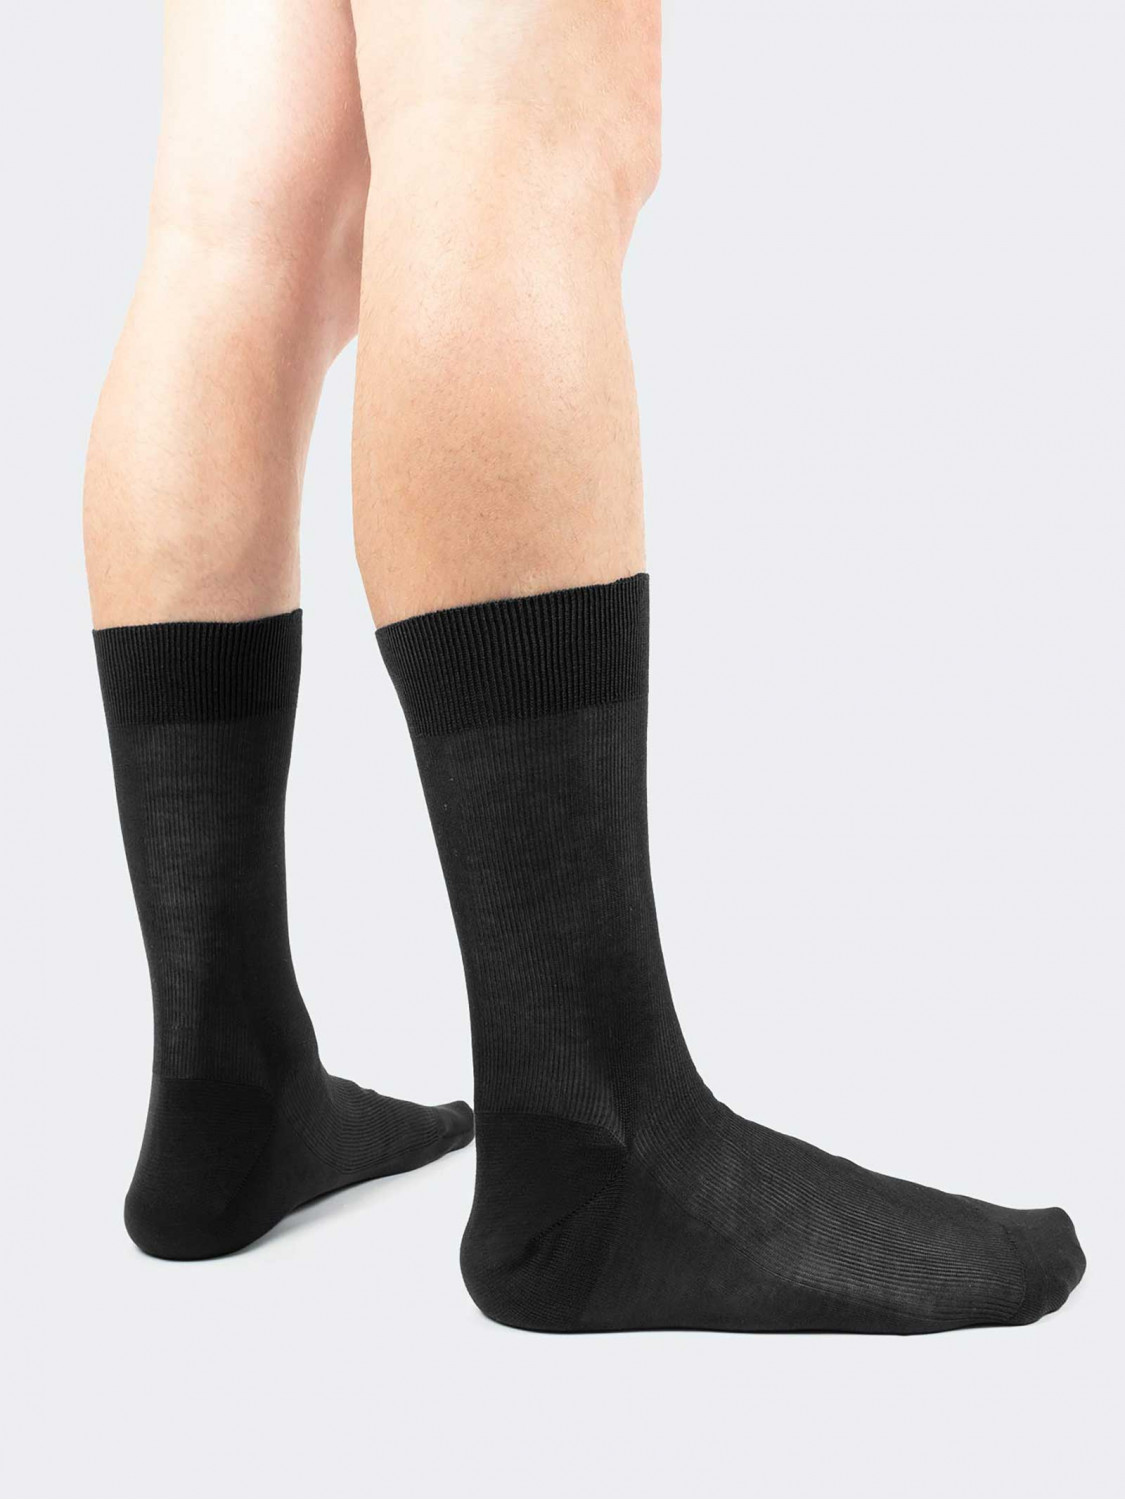 Ribbed 1:1 calf socks, 100% cotton - Made in Italy